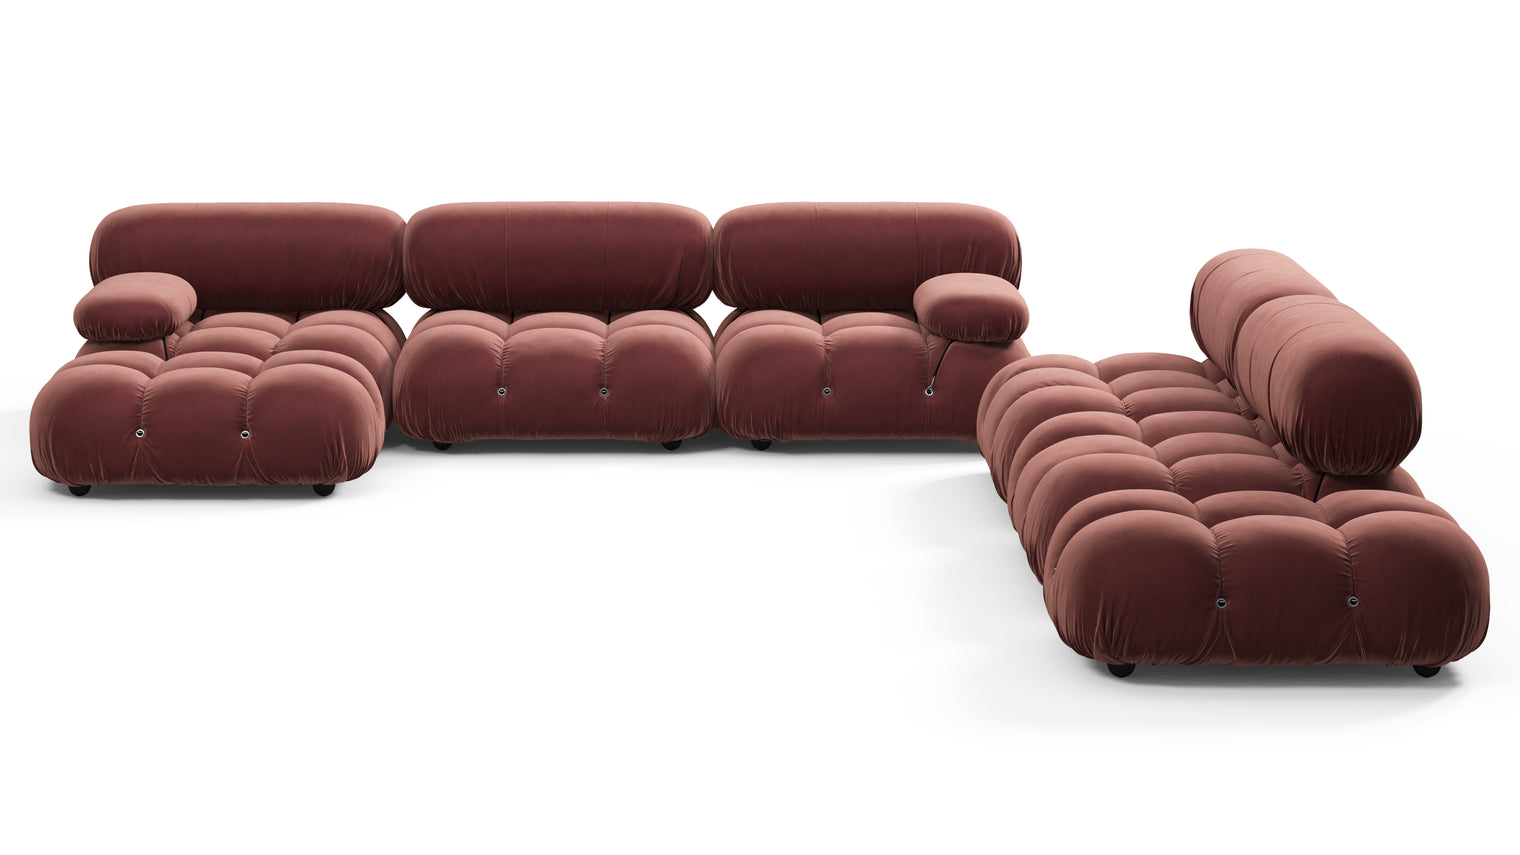 STYLISH SECTIONAL | With the Belia’s sectional design, you can create a sofa that suits your space. The soft curves of each carefully crafted cushion create a luxurious and comfortable seat for the ultimate in stylish comfort.
